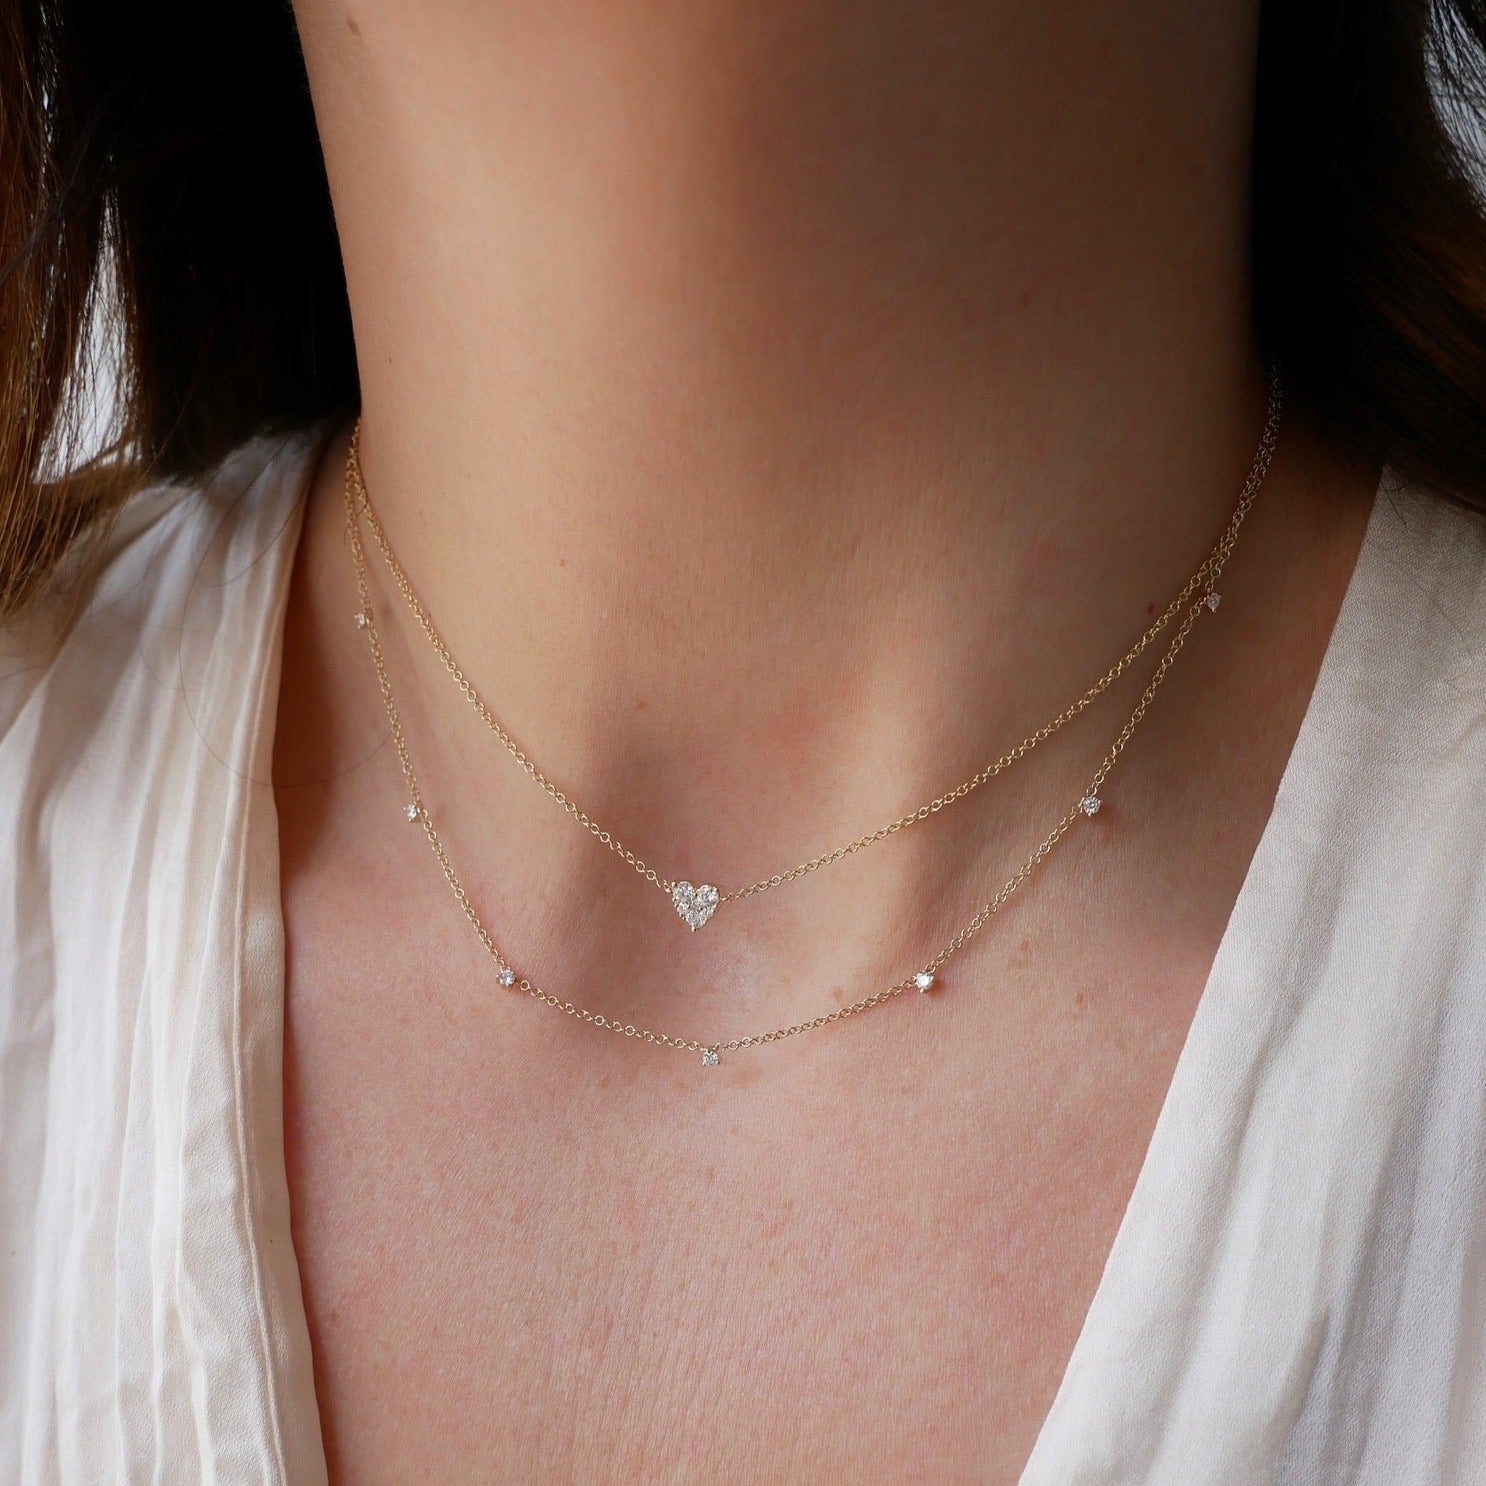 7 Prong Set Diamond Necklace in 14k yellow gold styled on neck of model